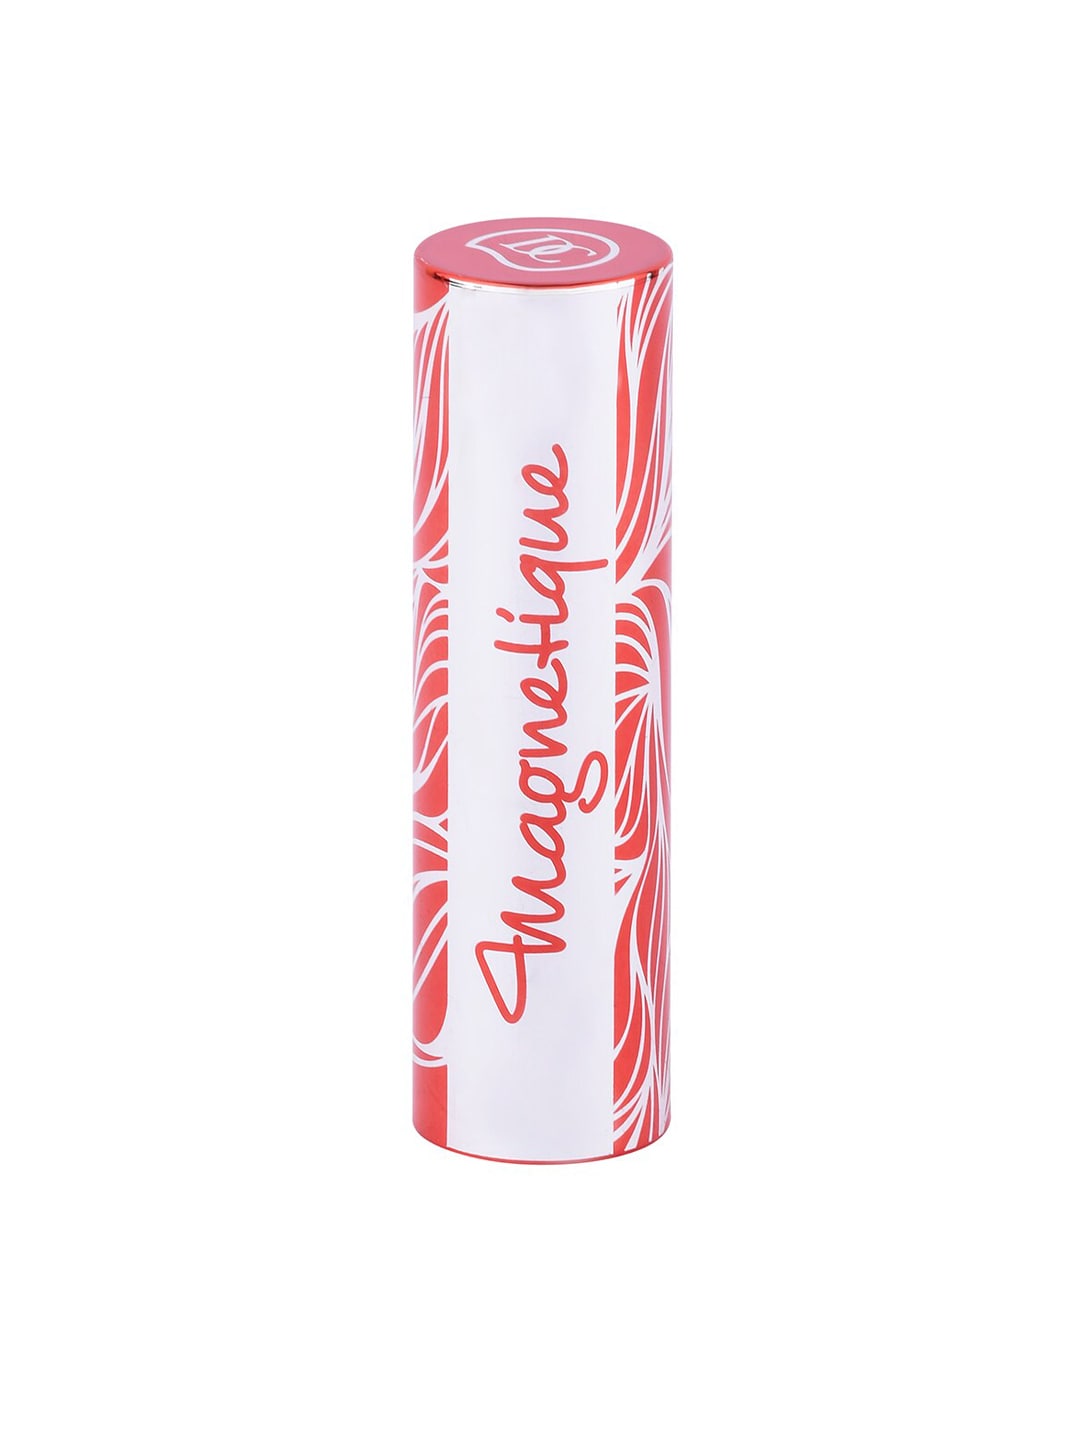 Dermacol Magnetique Lipstick Maroon No.15 - 4.4 g Price in India